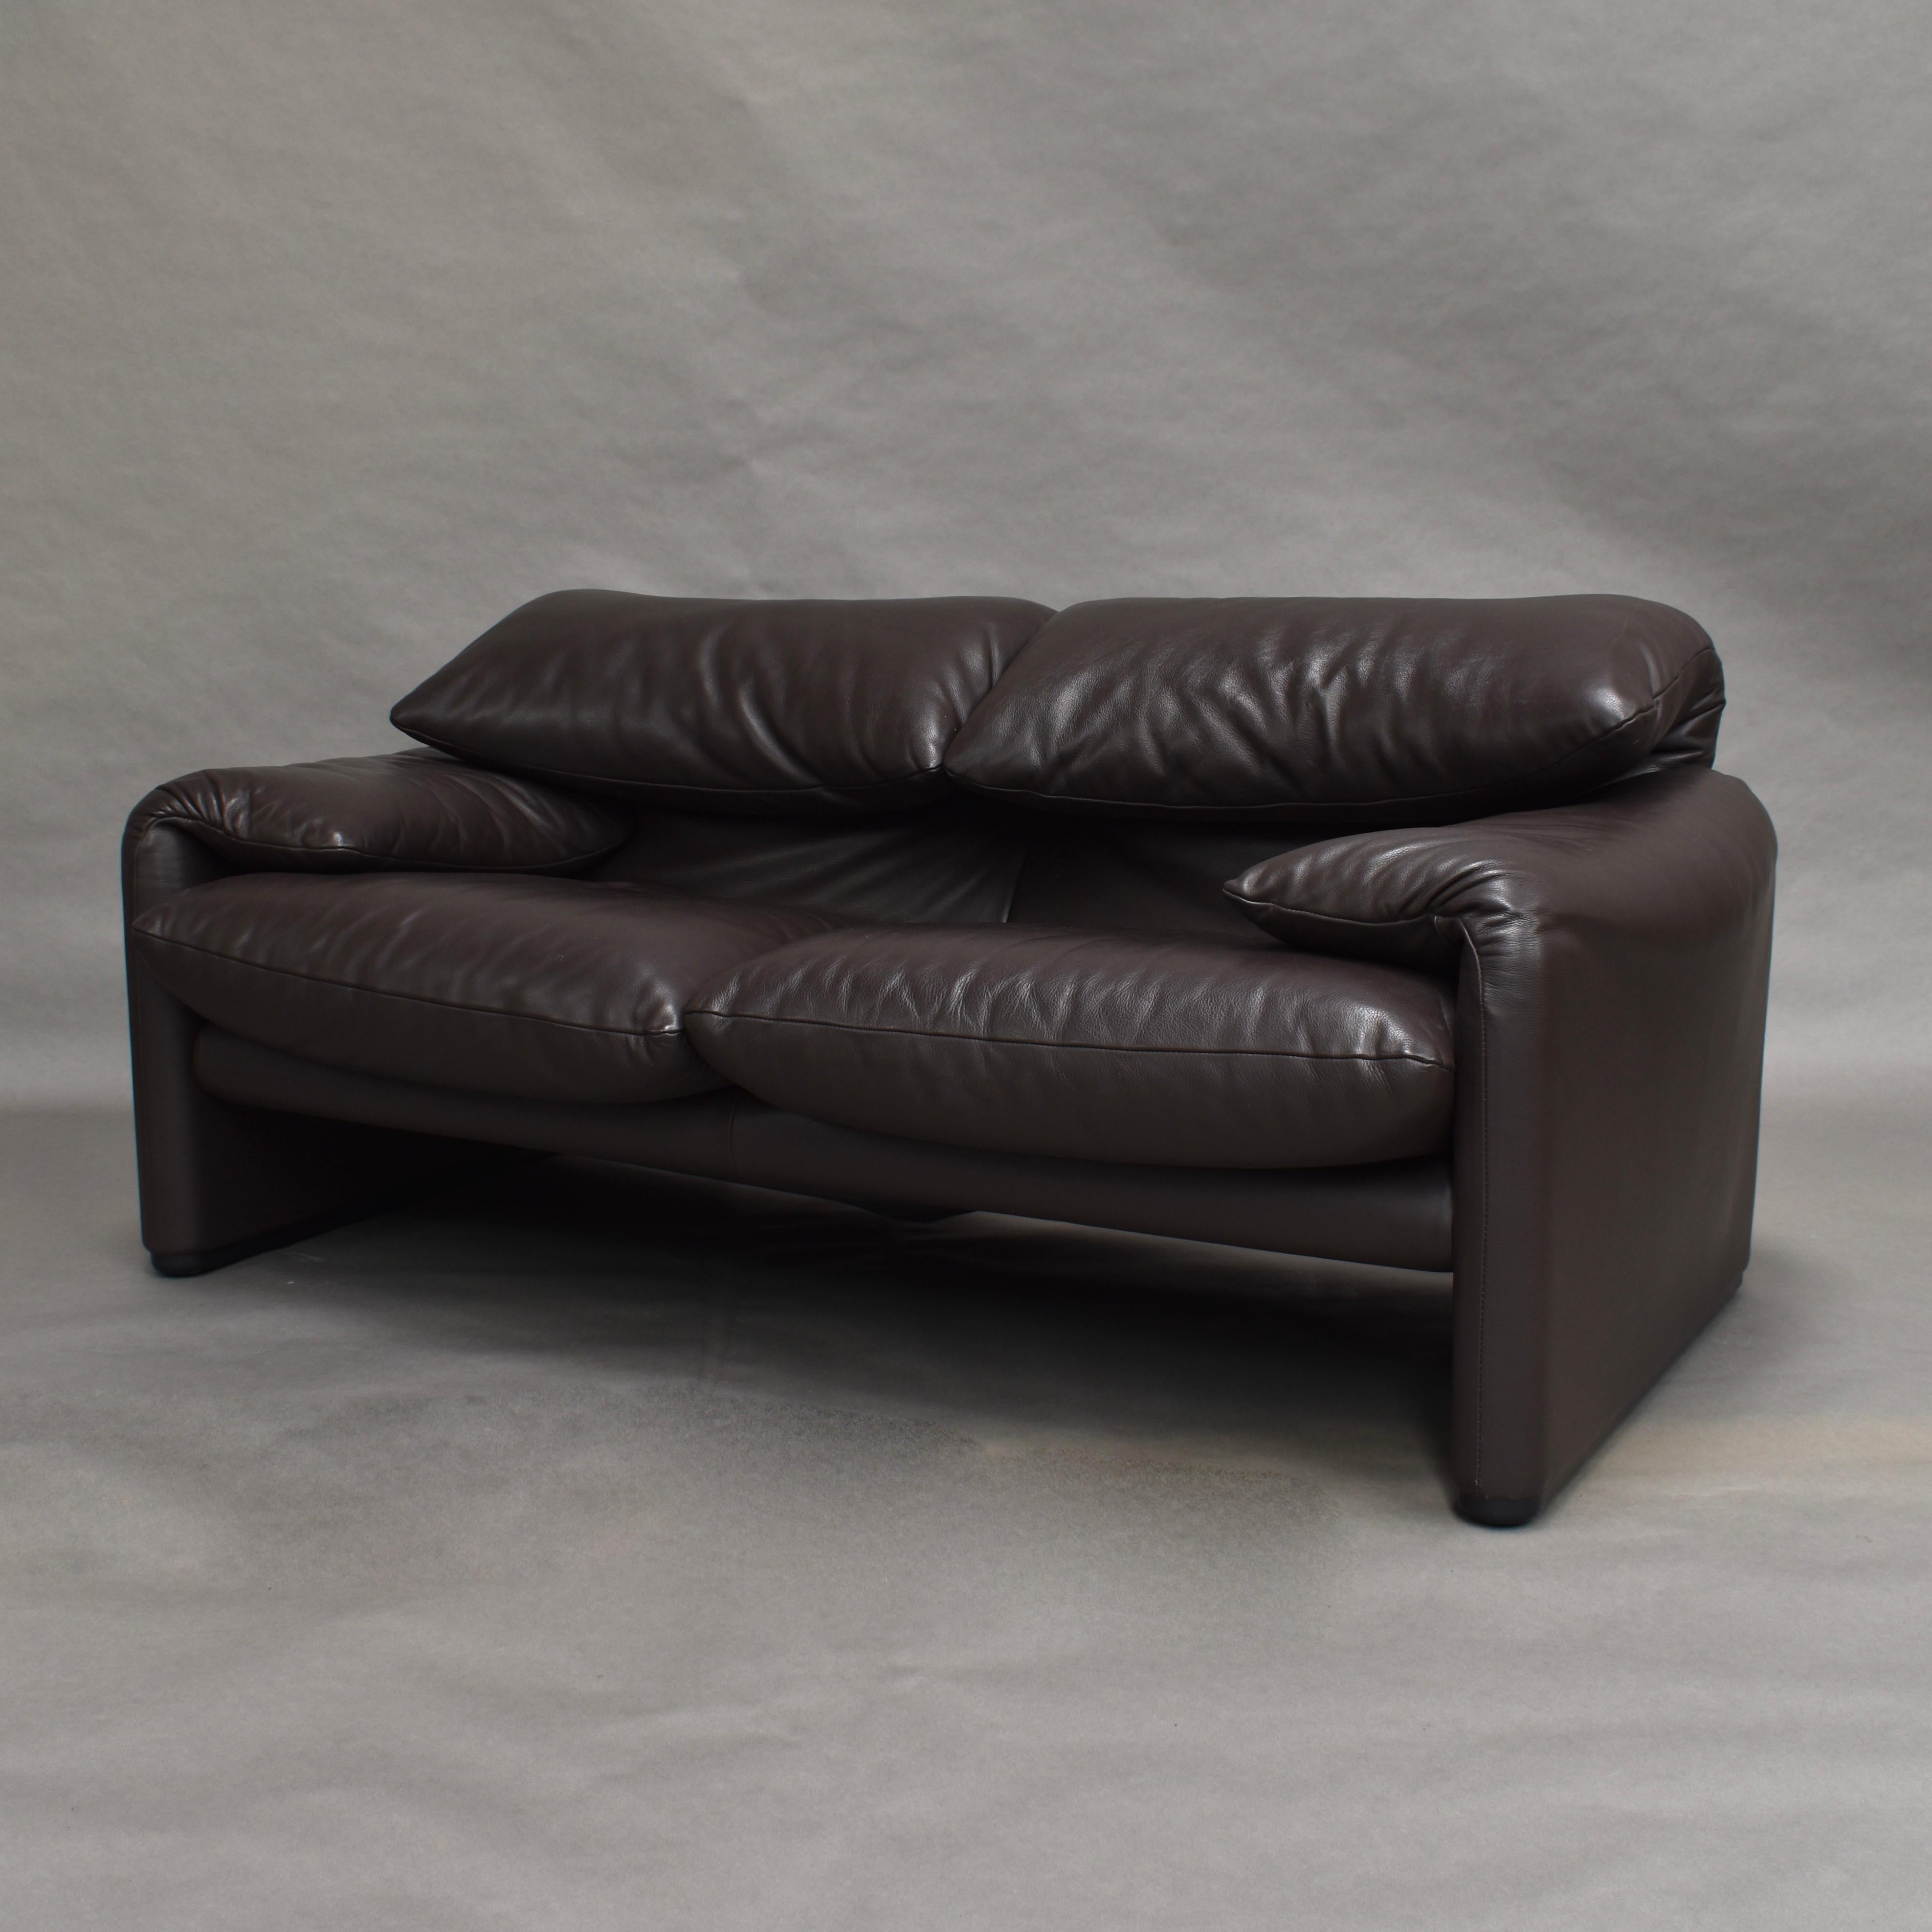 Late 20th Century Maralunga Sofa in Brown Leather by Vico Magistratti for Cassina, Italy, 1973